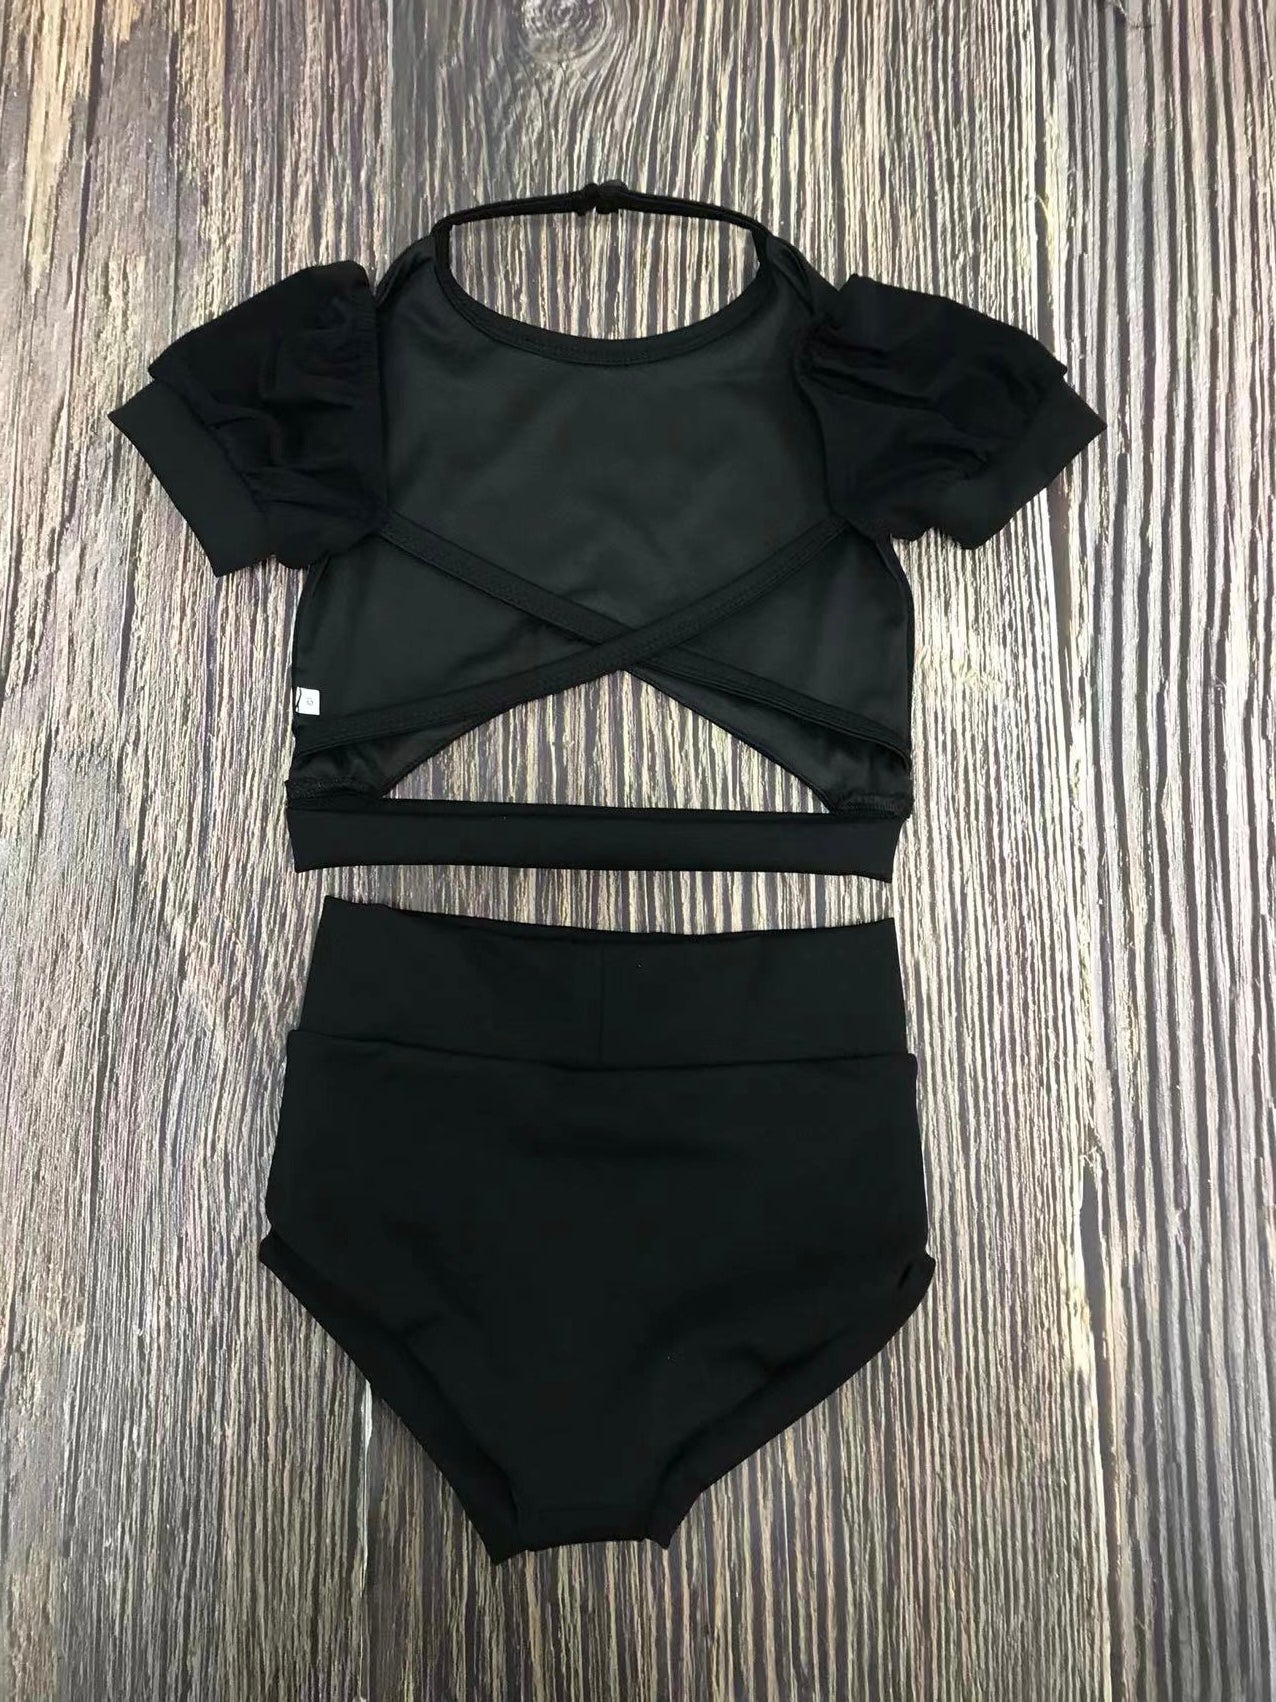 Trendsetter Onyx Triangle Mesh Top Two Piece Dance Set - Evie's Closet Clothing